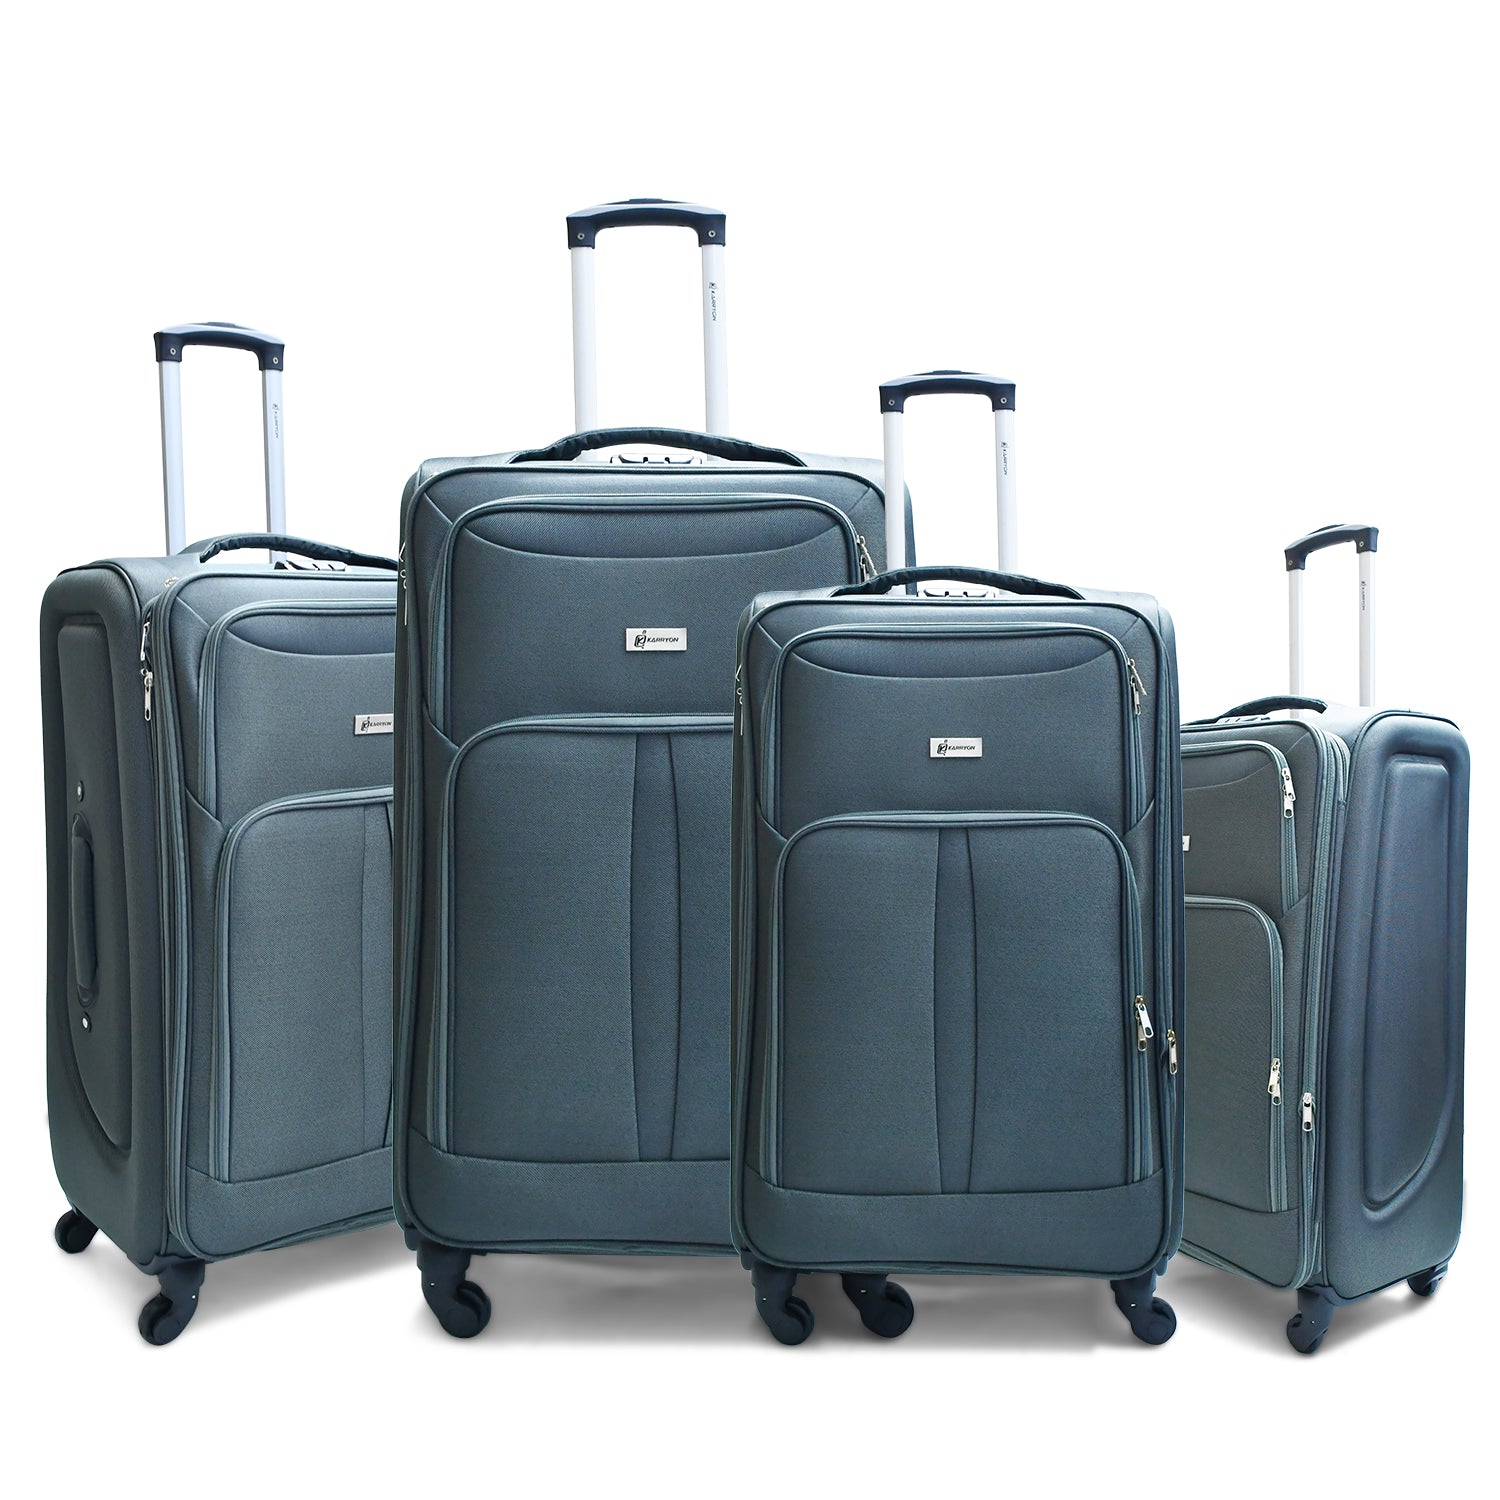 LONG VACATION Luggage Set 4 Piece Luggage Set ABS